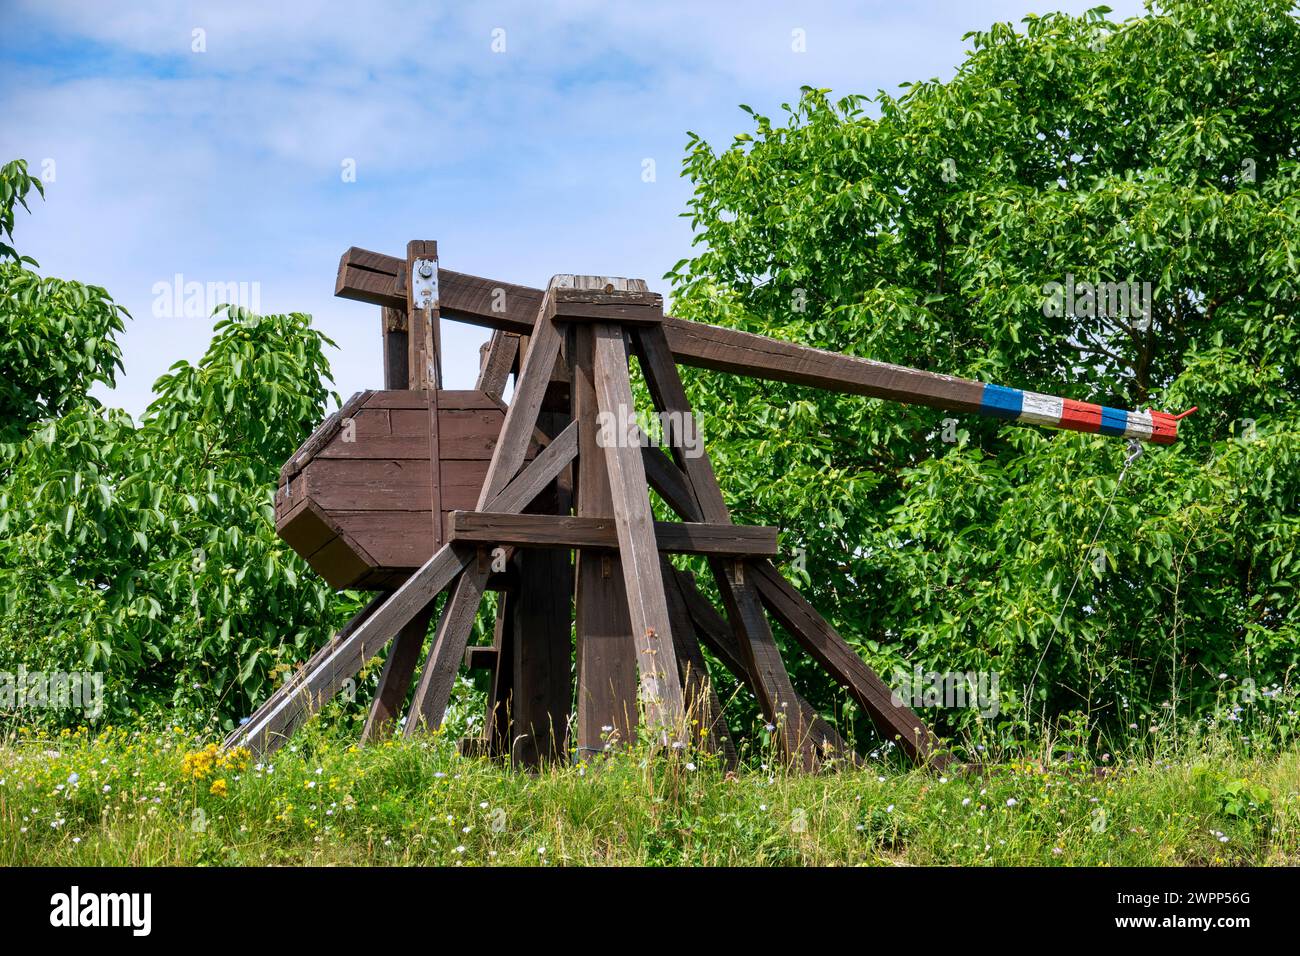 Catapult at the ruins of Schaumburg Castle, also known as Schaumberg, located west of Schalkau (Sonneberg district) in Thuringia. It was the ancestral seat of the noble Schaumberg family. Stock Photo